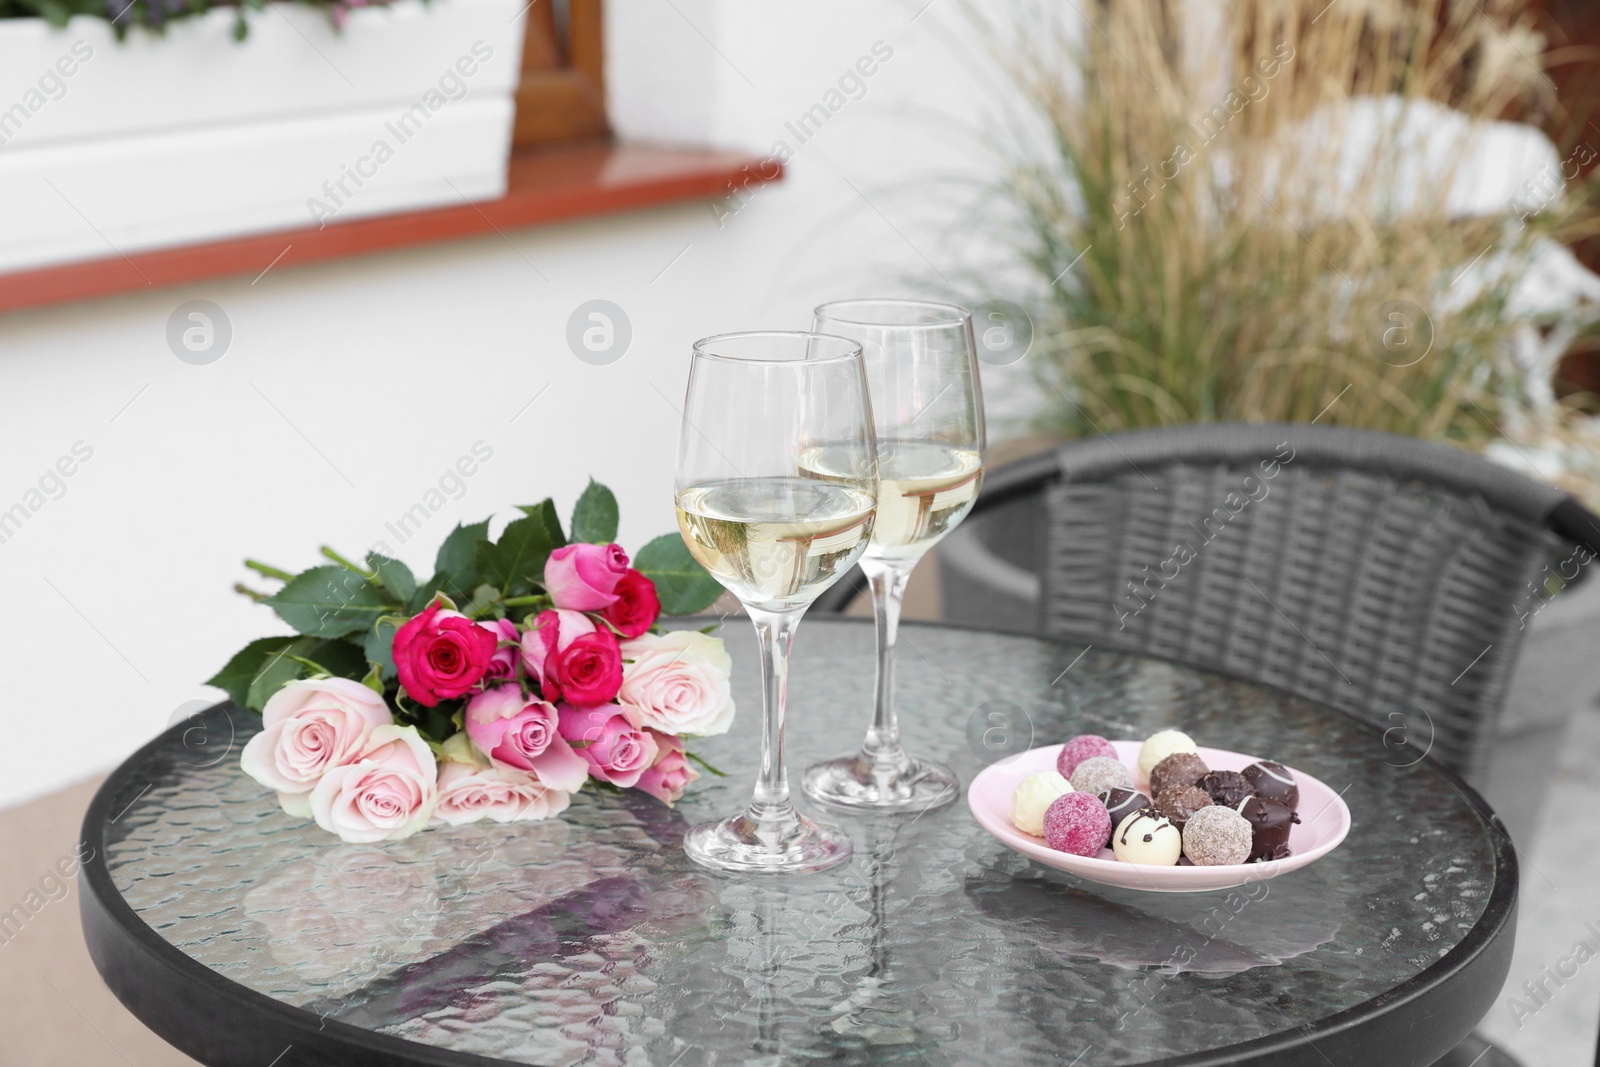 Photo of Bouquet of roses, glasses with wine and candies on glass table on outdoor terrace